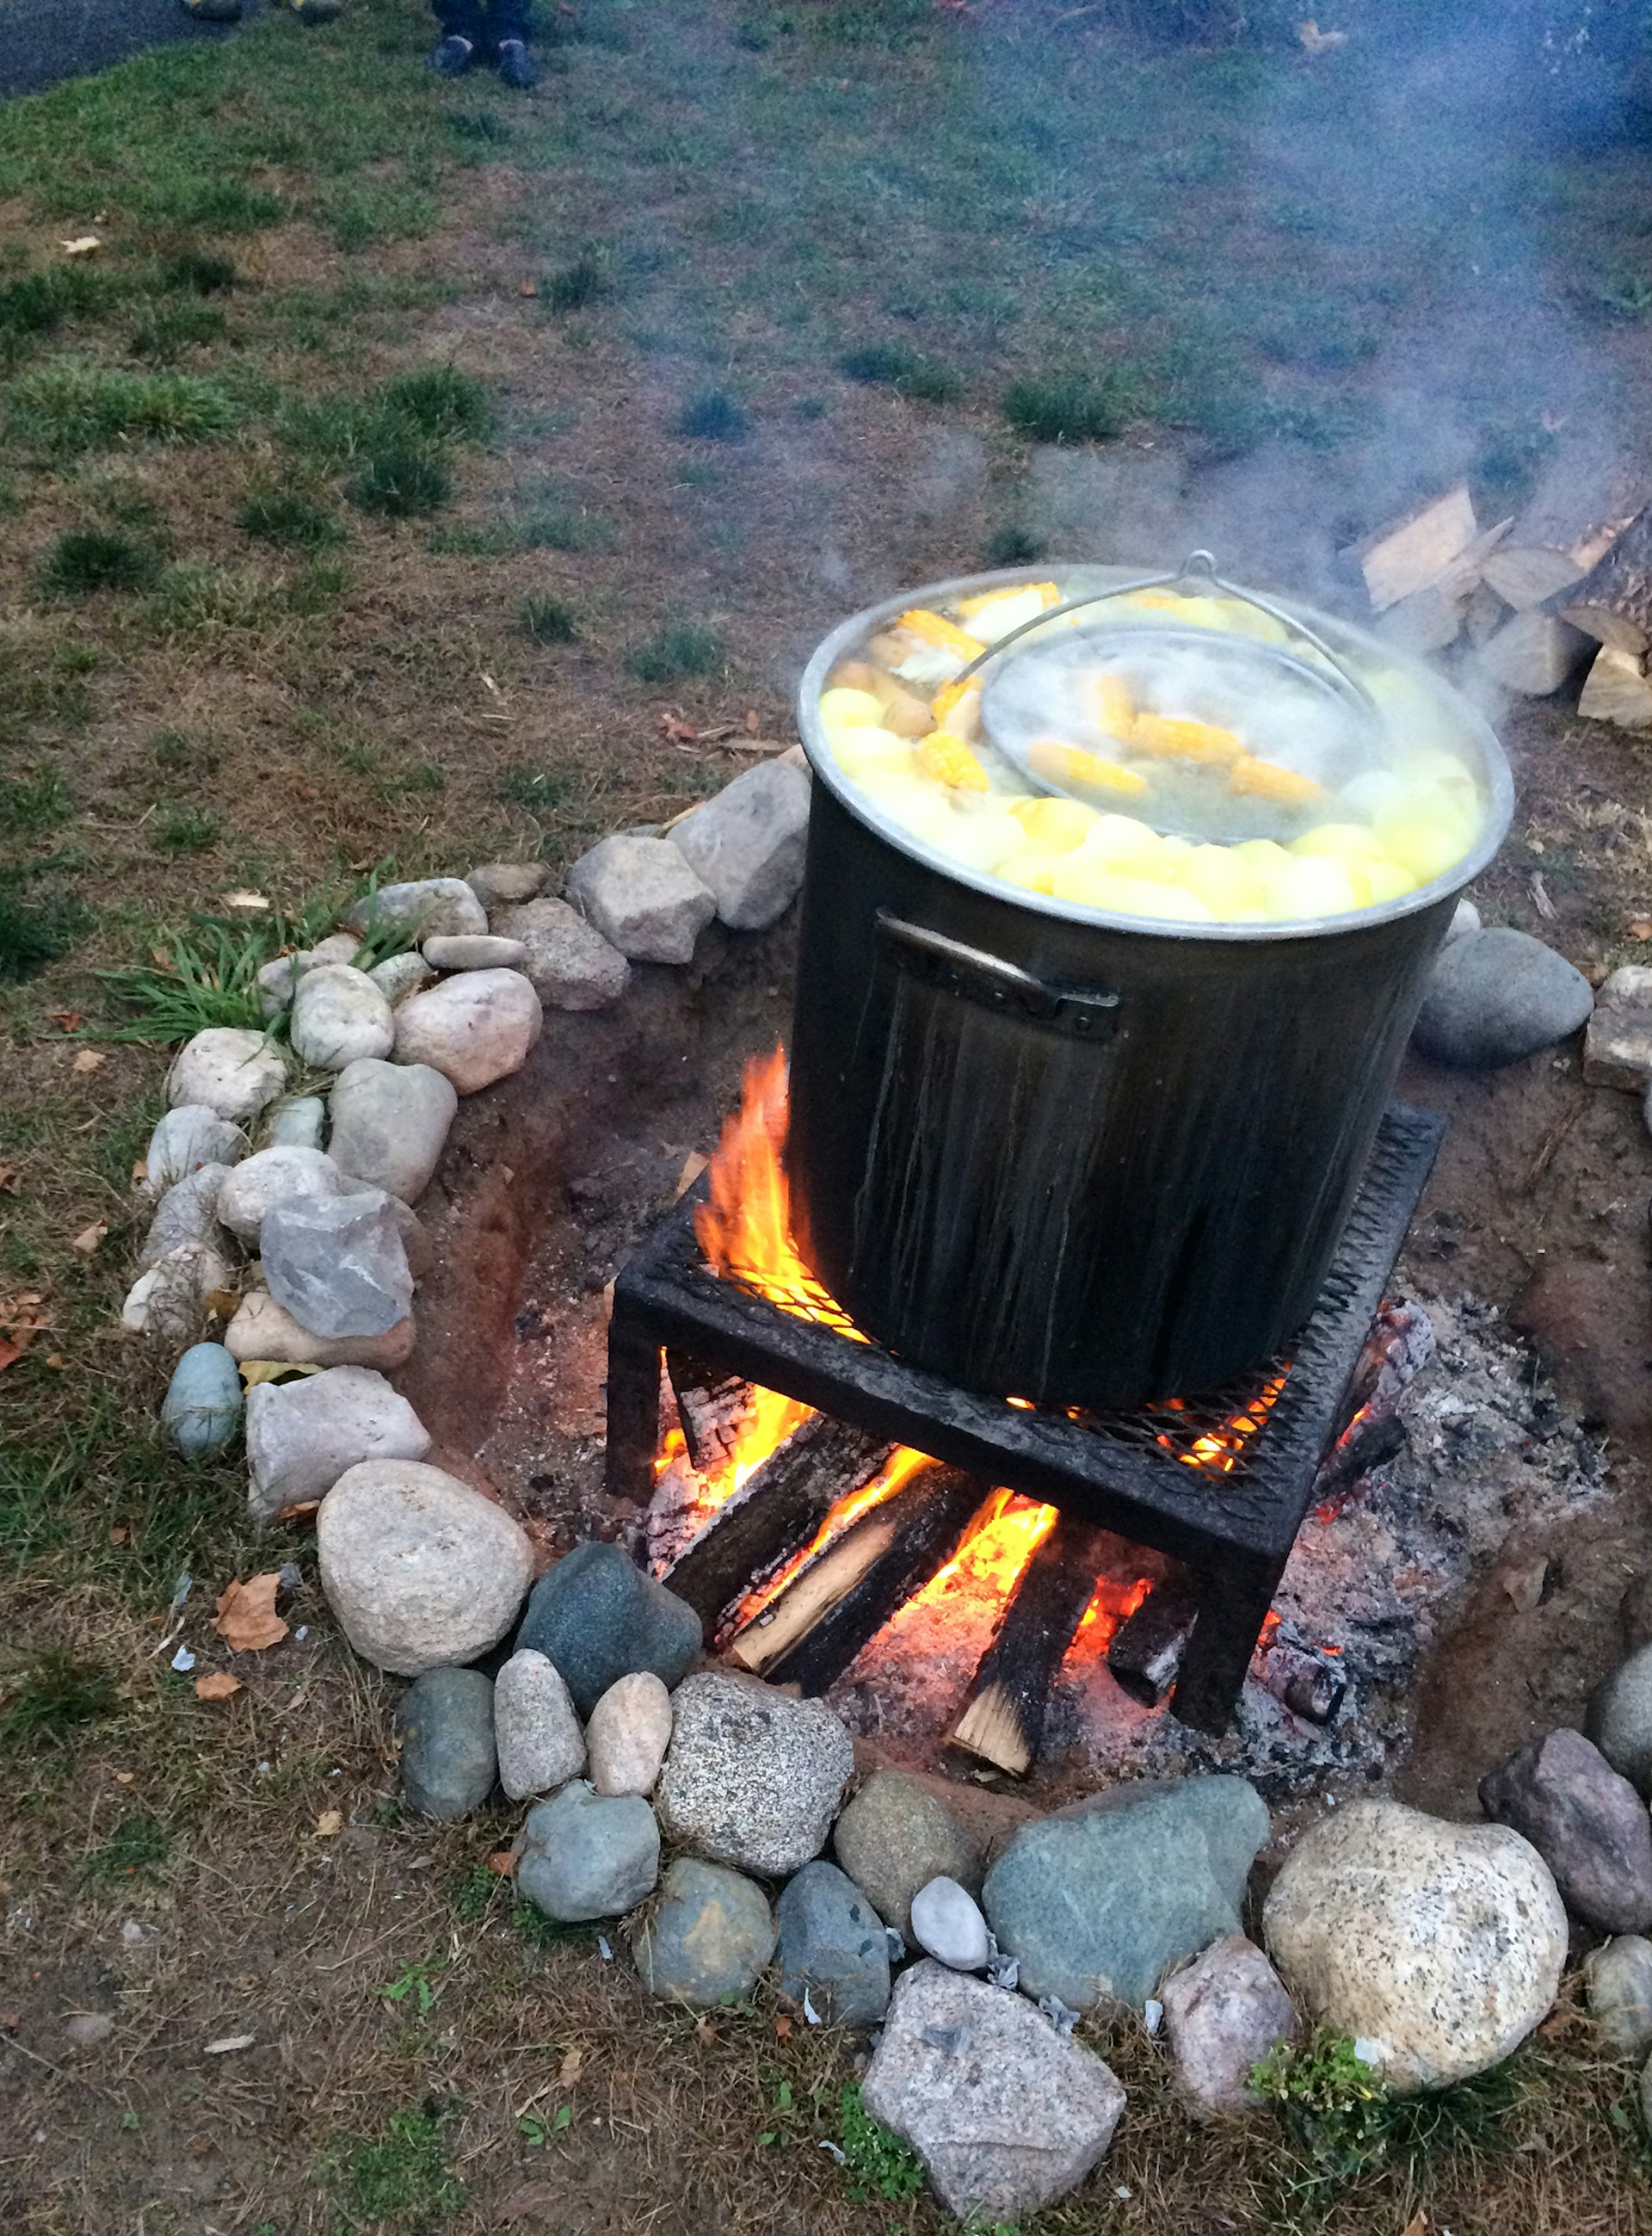 Corn floats at the top of a large cast-iron pot over an open fire outdoors as part of a fish boil